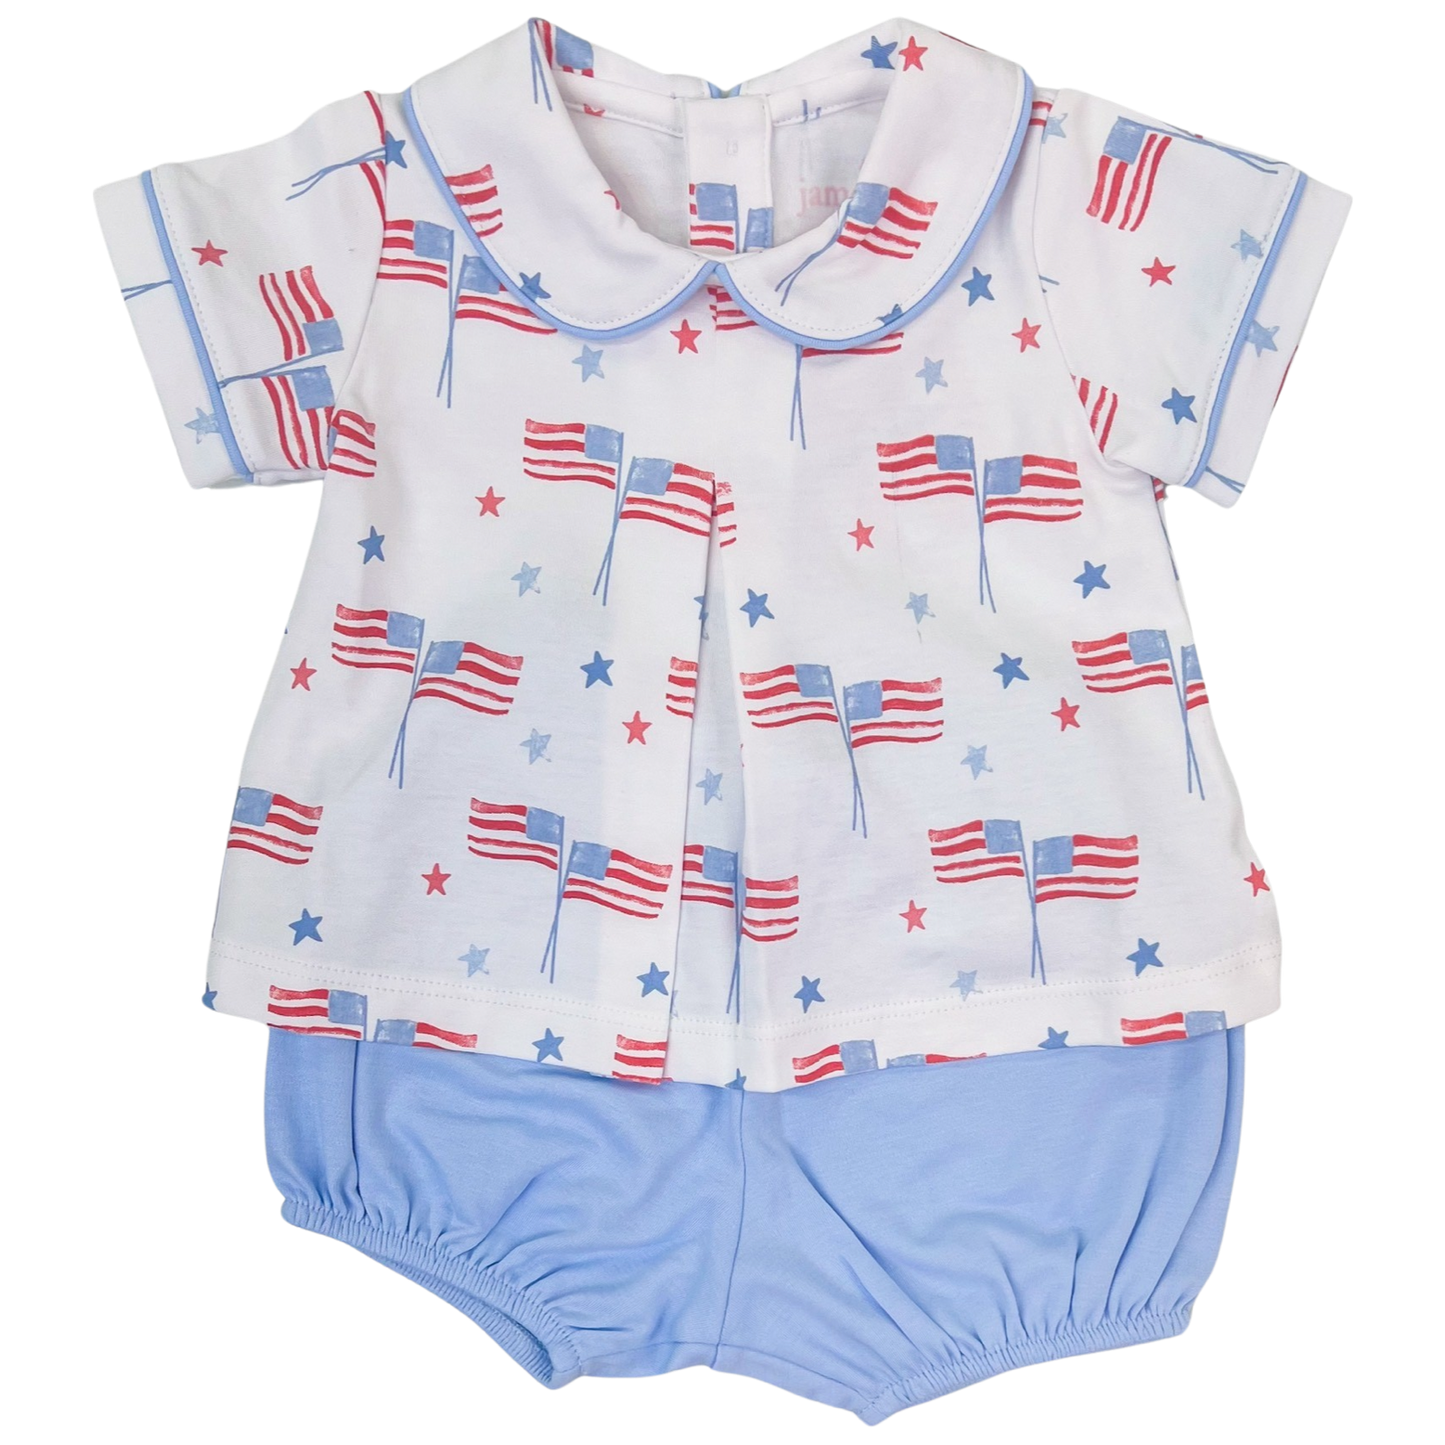 James & Lottie Rory Diaper Set - Our Country